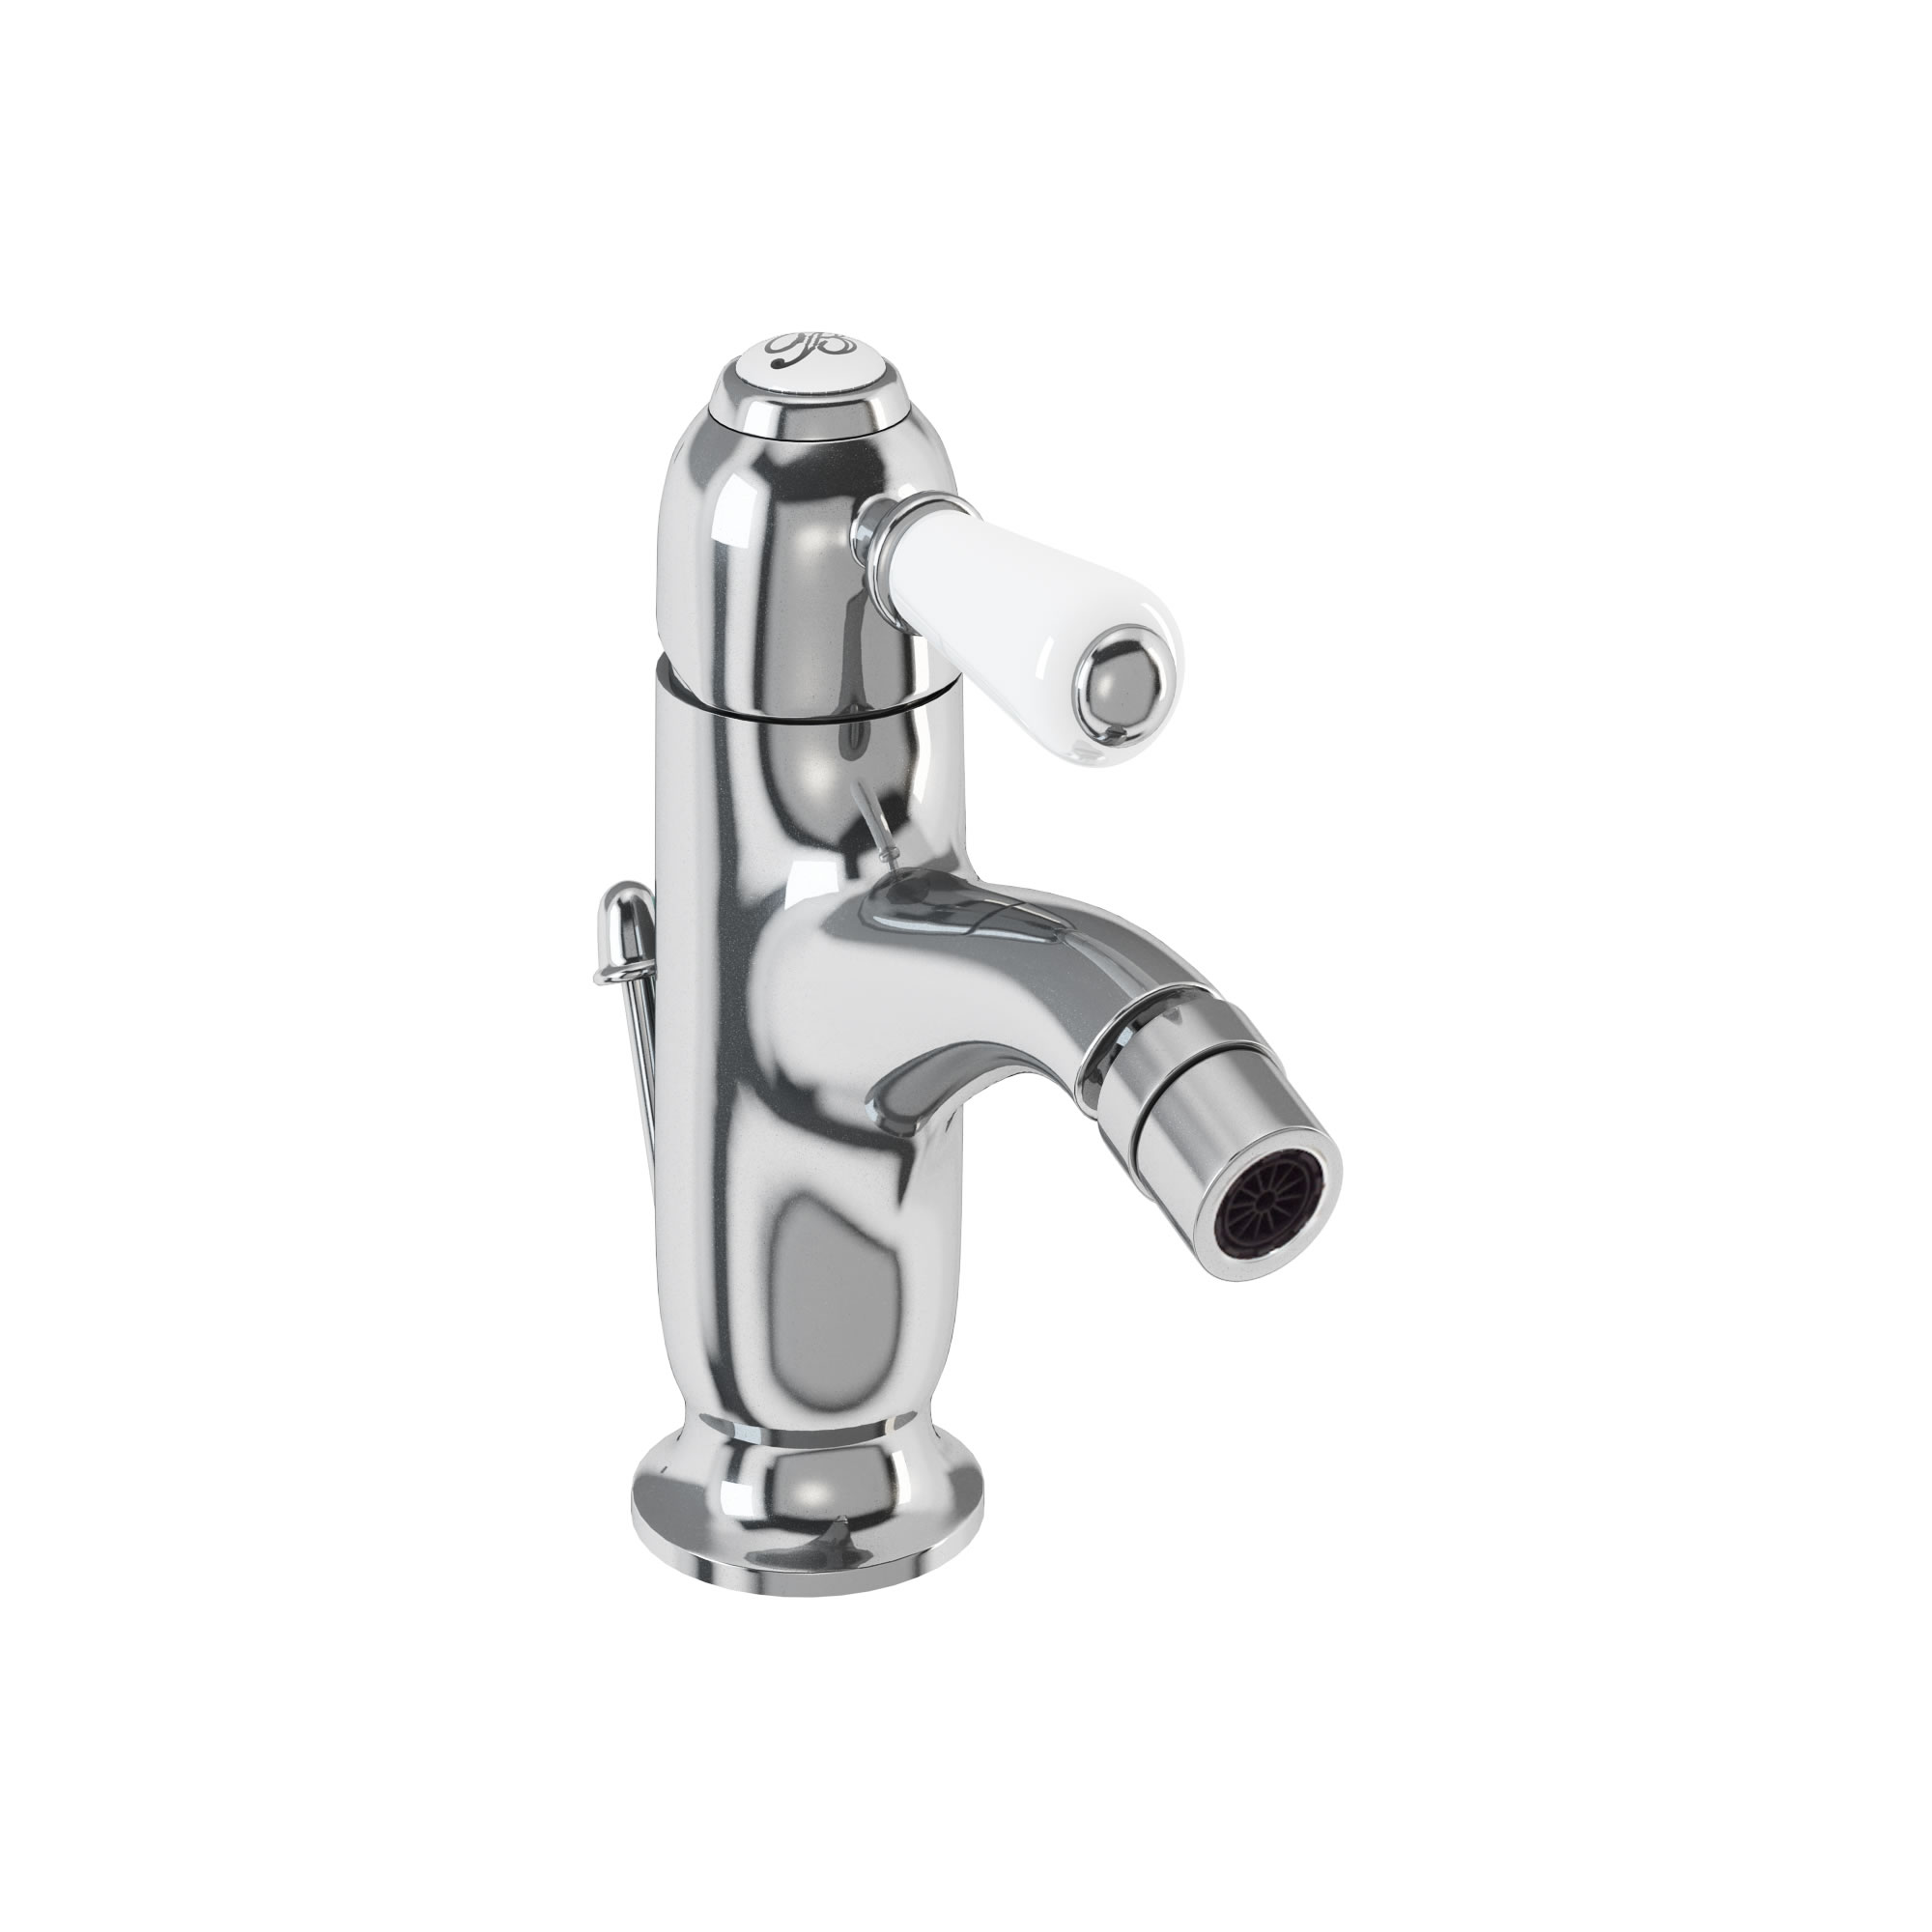 Chelsea Curved Bidet Mixer with pop-up waste